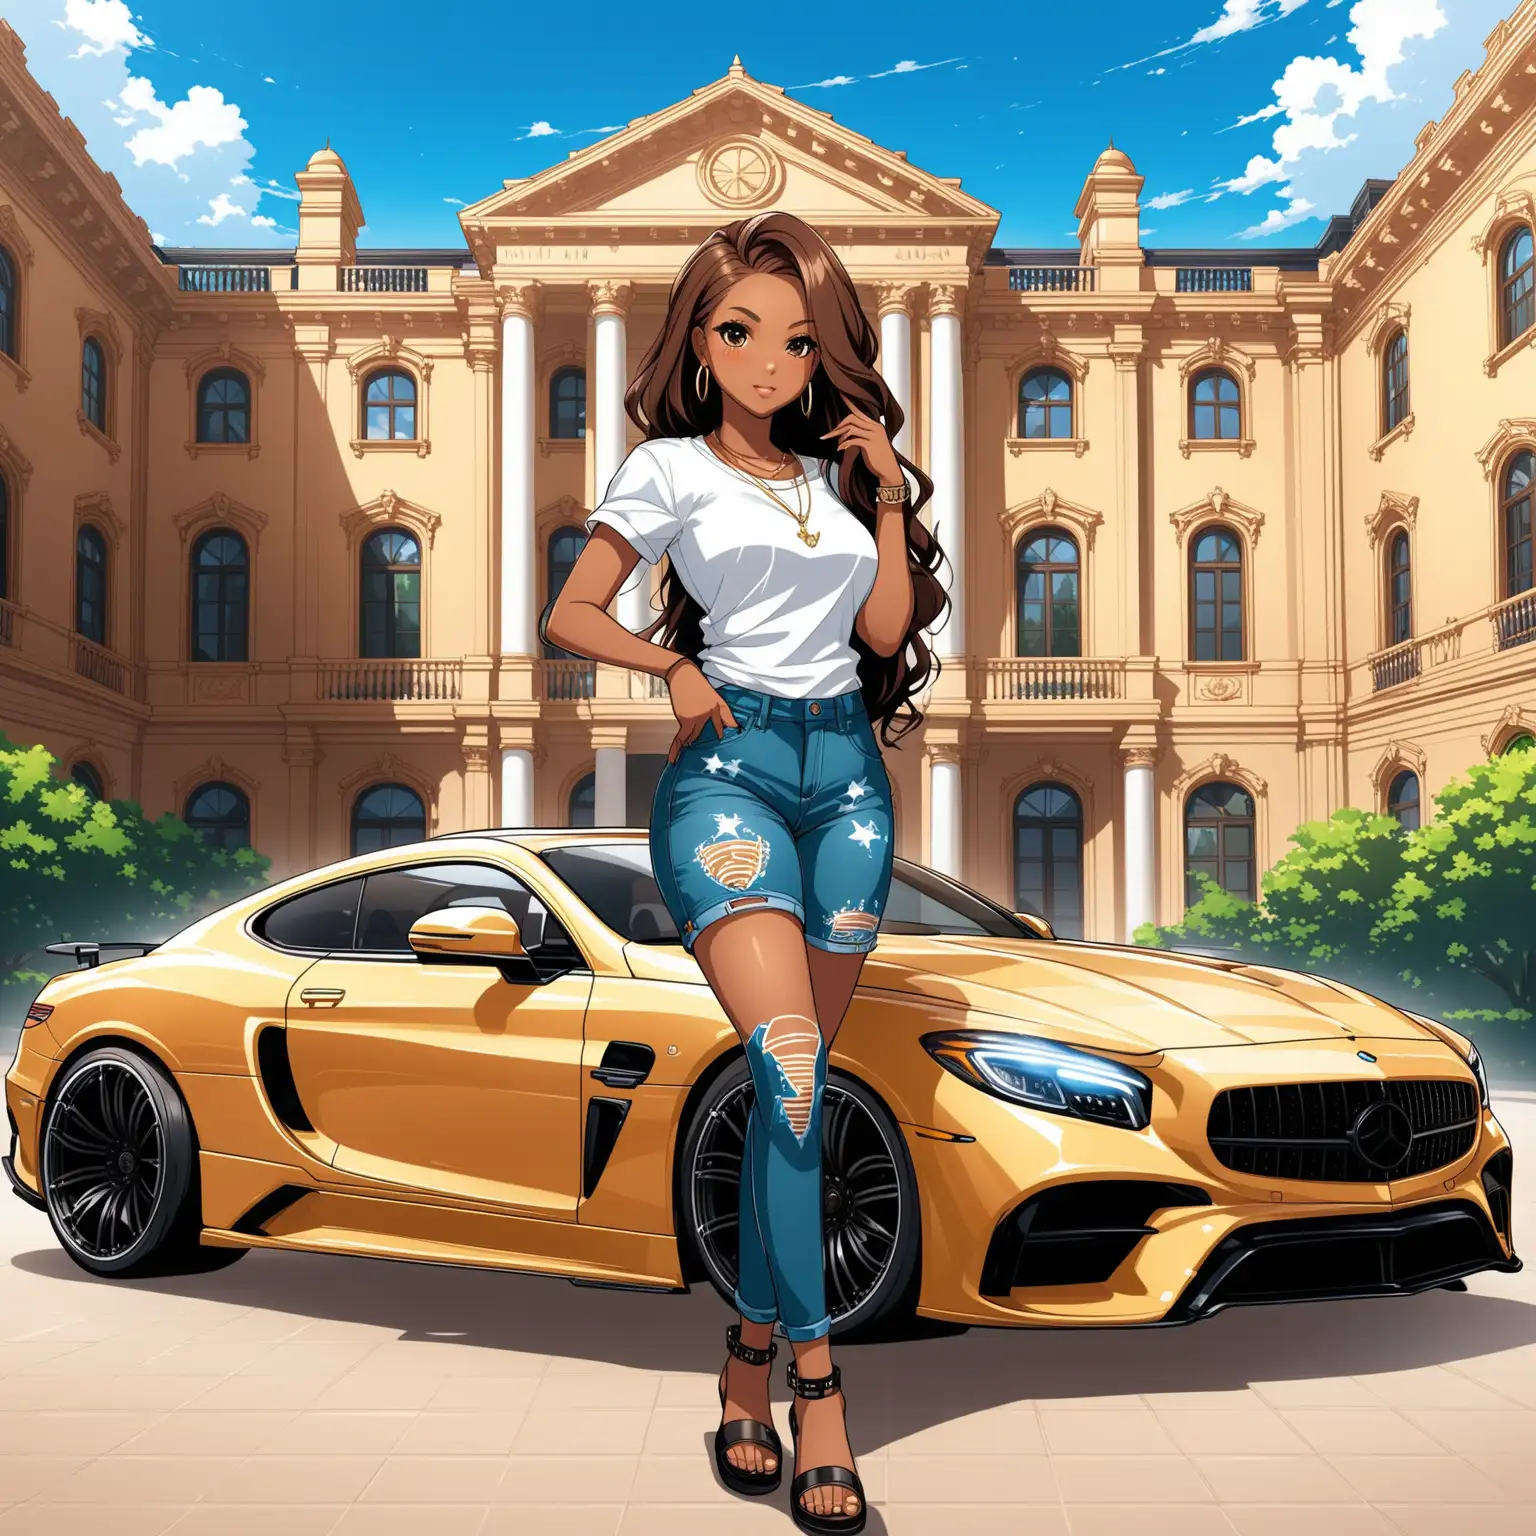 Urban American Girl Anime Logo in Mansion Setting with Luxury Vehicles